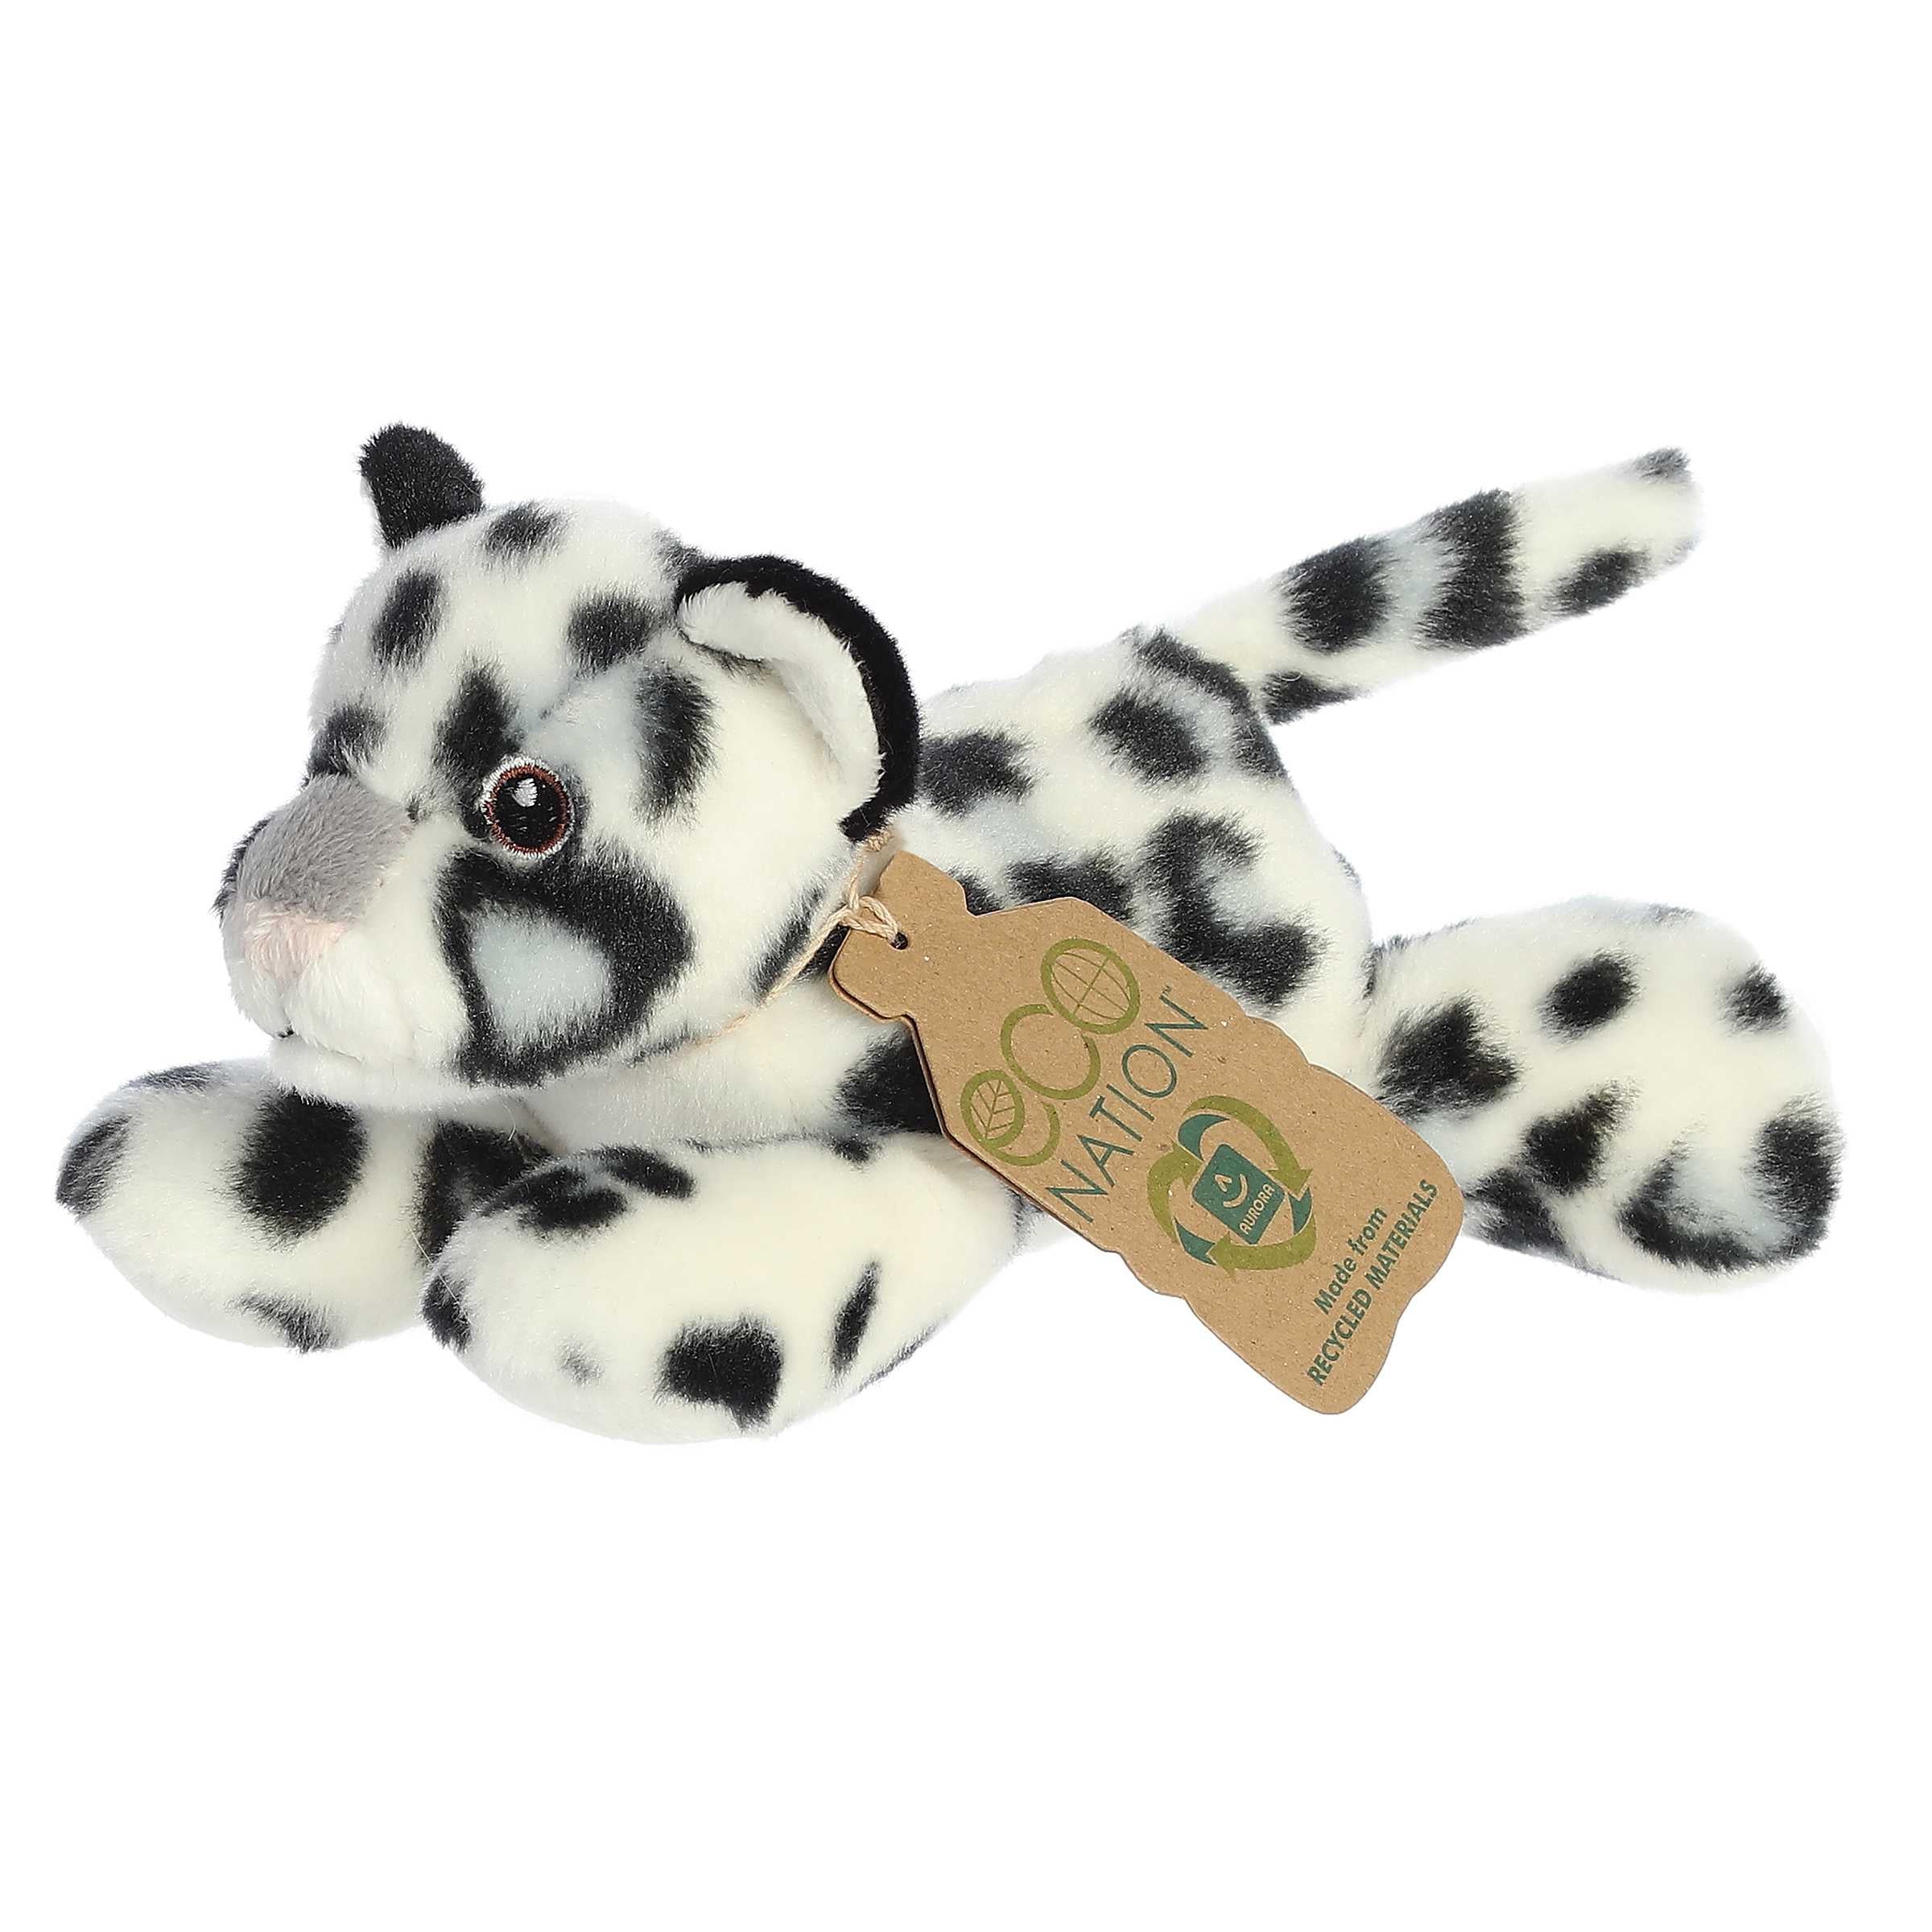 Eco Softie Snow Leopard Plush, featuring a spot pattern and soft fur, with 'Eco Nation' tag, symbolizing environmental care.